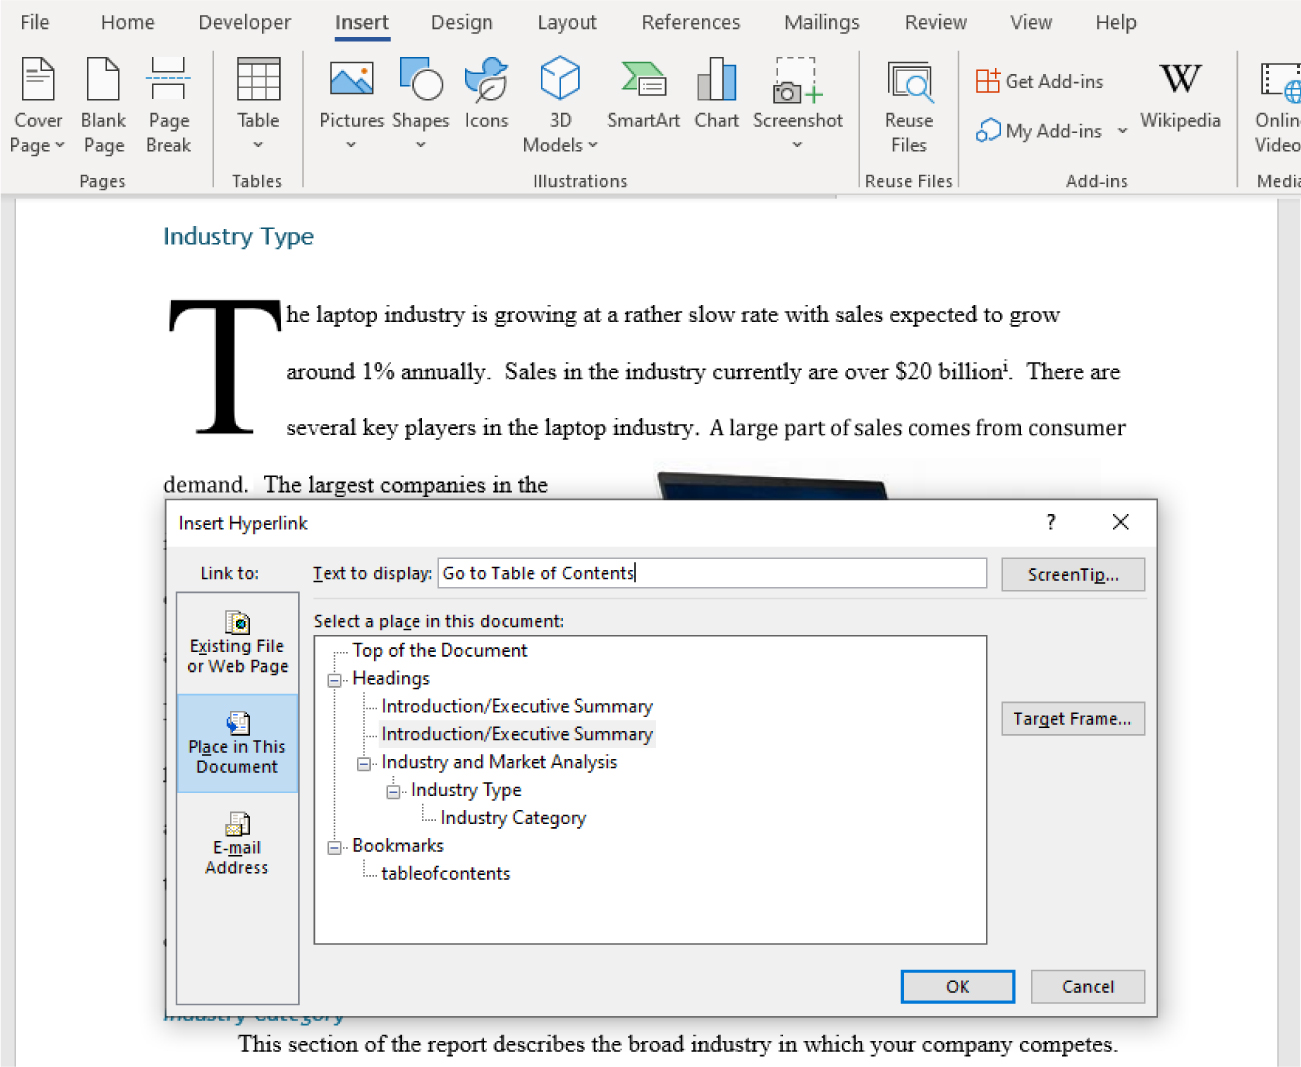 Insert Hyperlink lists options to Link to Existing File or Web Page, Place in This Document, E-mail Address. Text to Display and Select a place in this document are available with options.